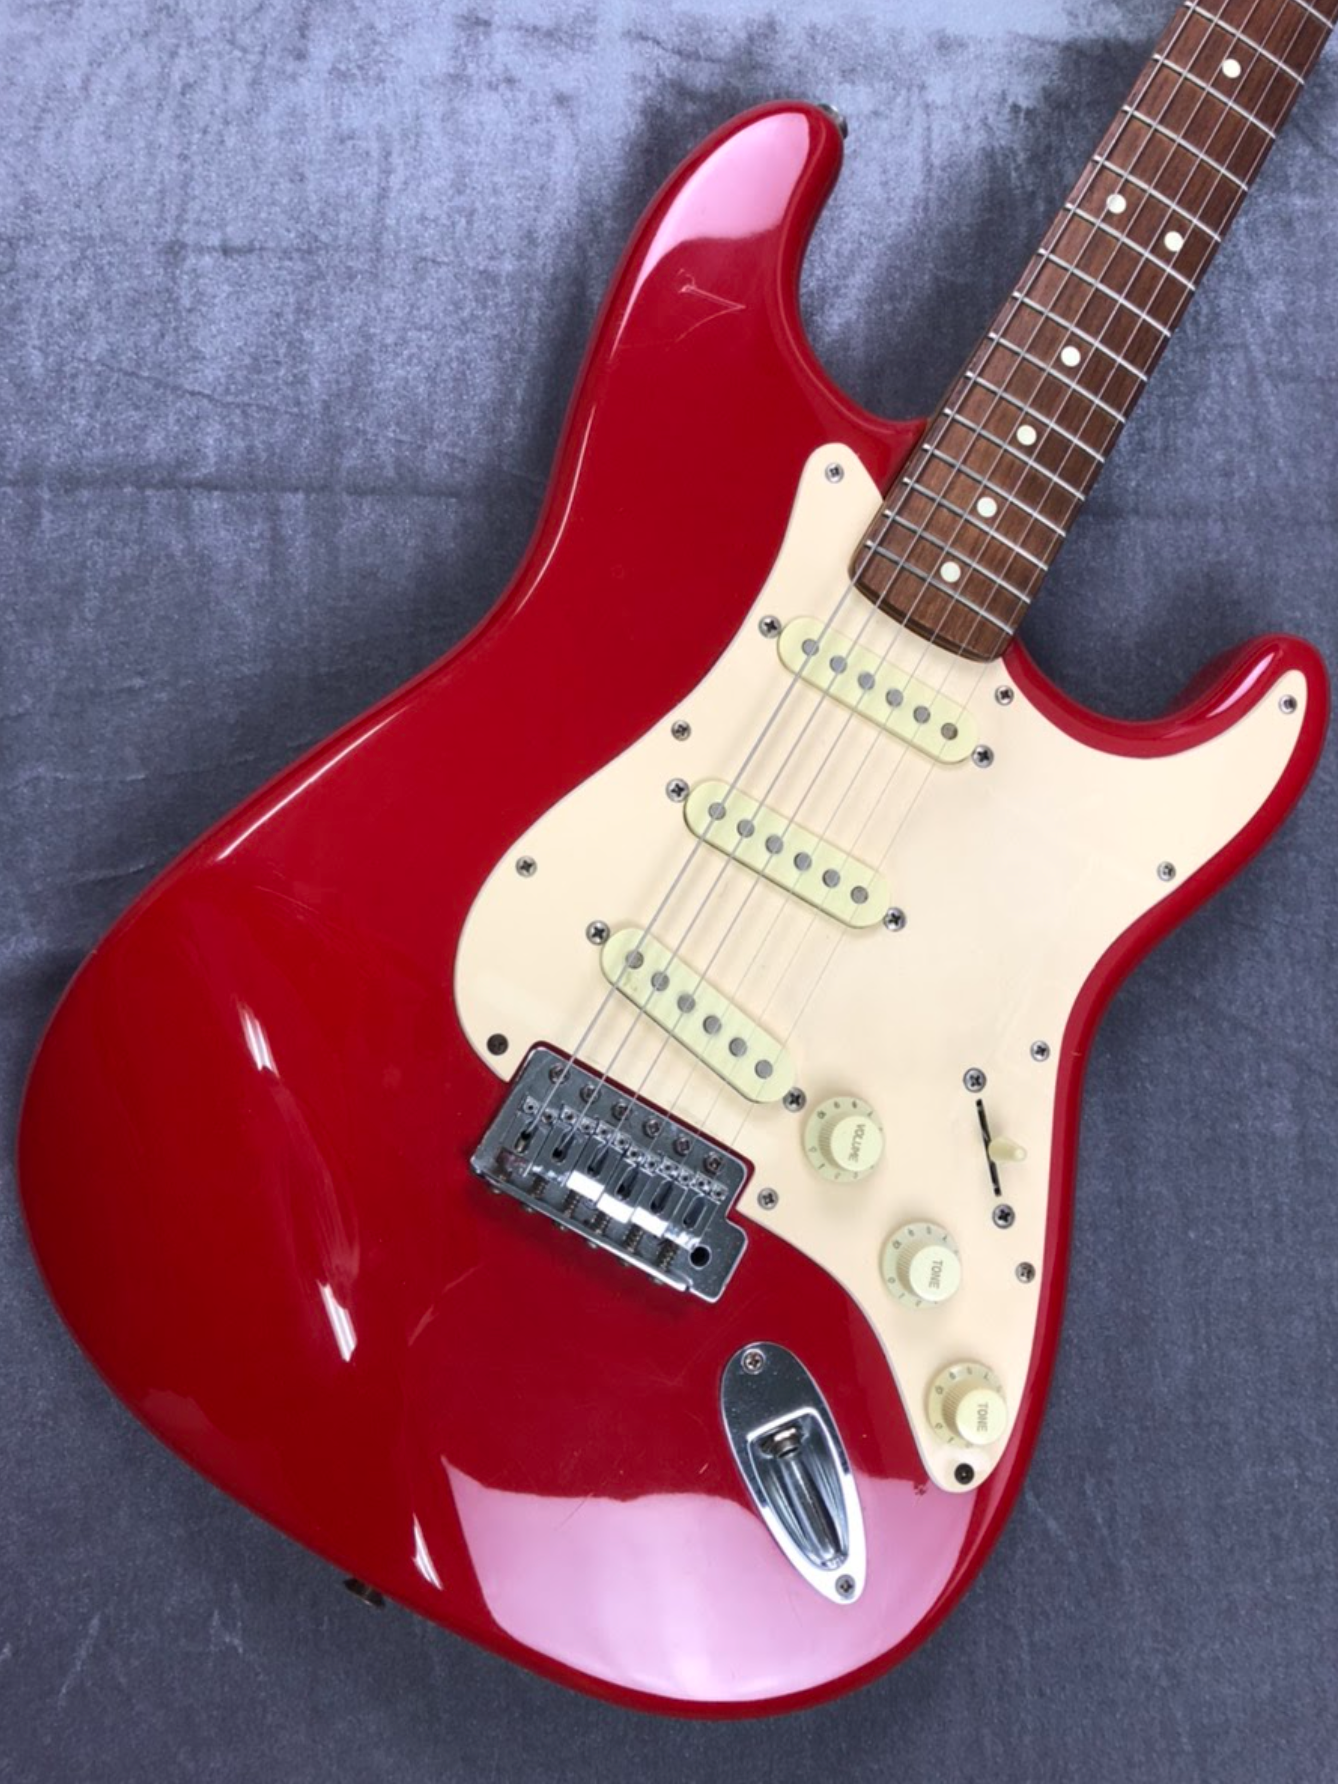 Used Fender Mexico Stratocaster